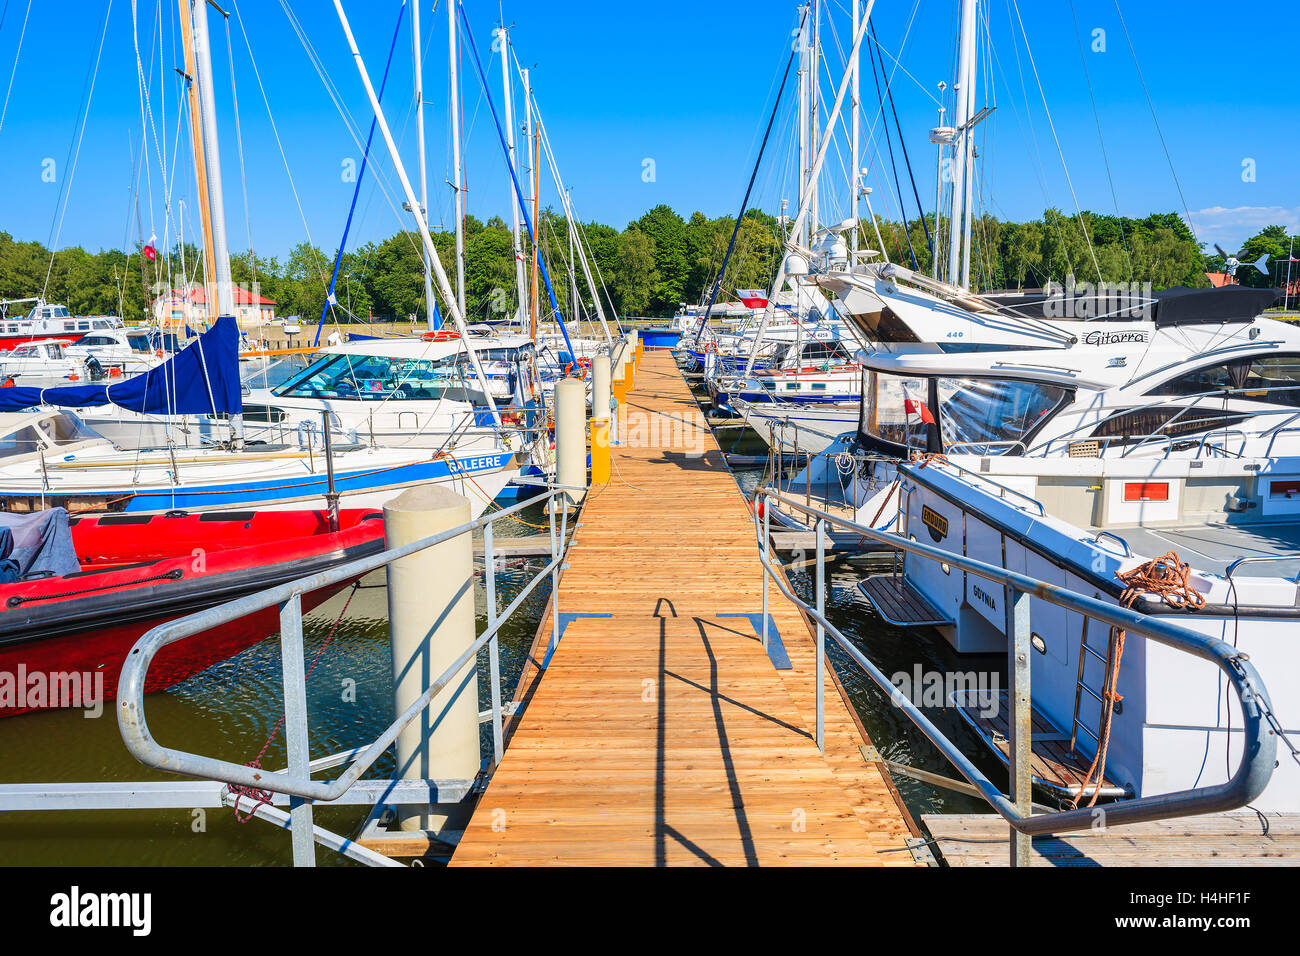 LEBA SAILING PORT, POLAND - JUN 23, 2016: a view of sailing port in Leba town on coast of Baltic Sea, Poland. This is one of the Stock Photo